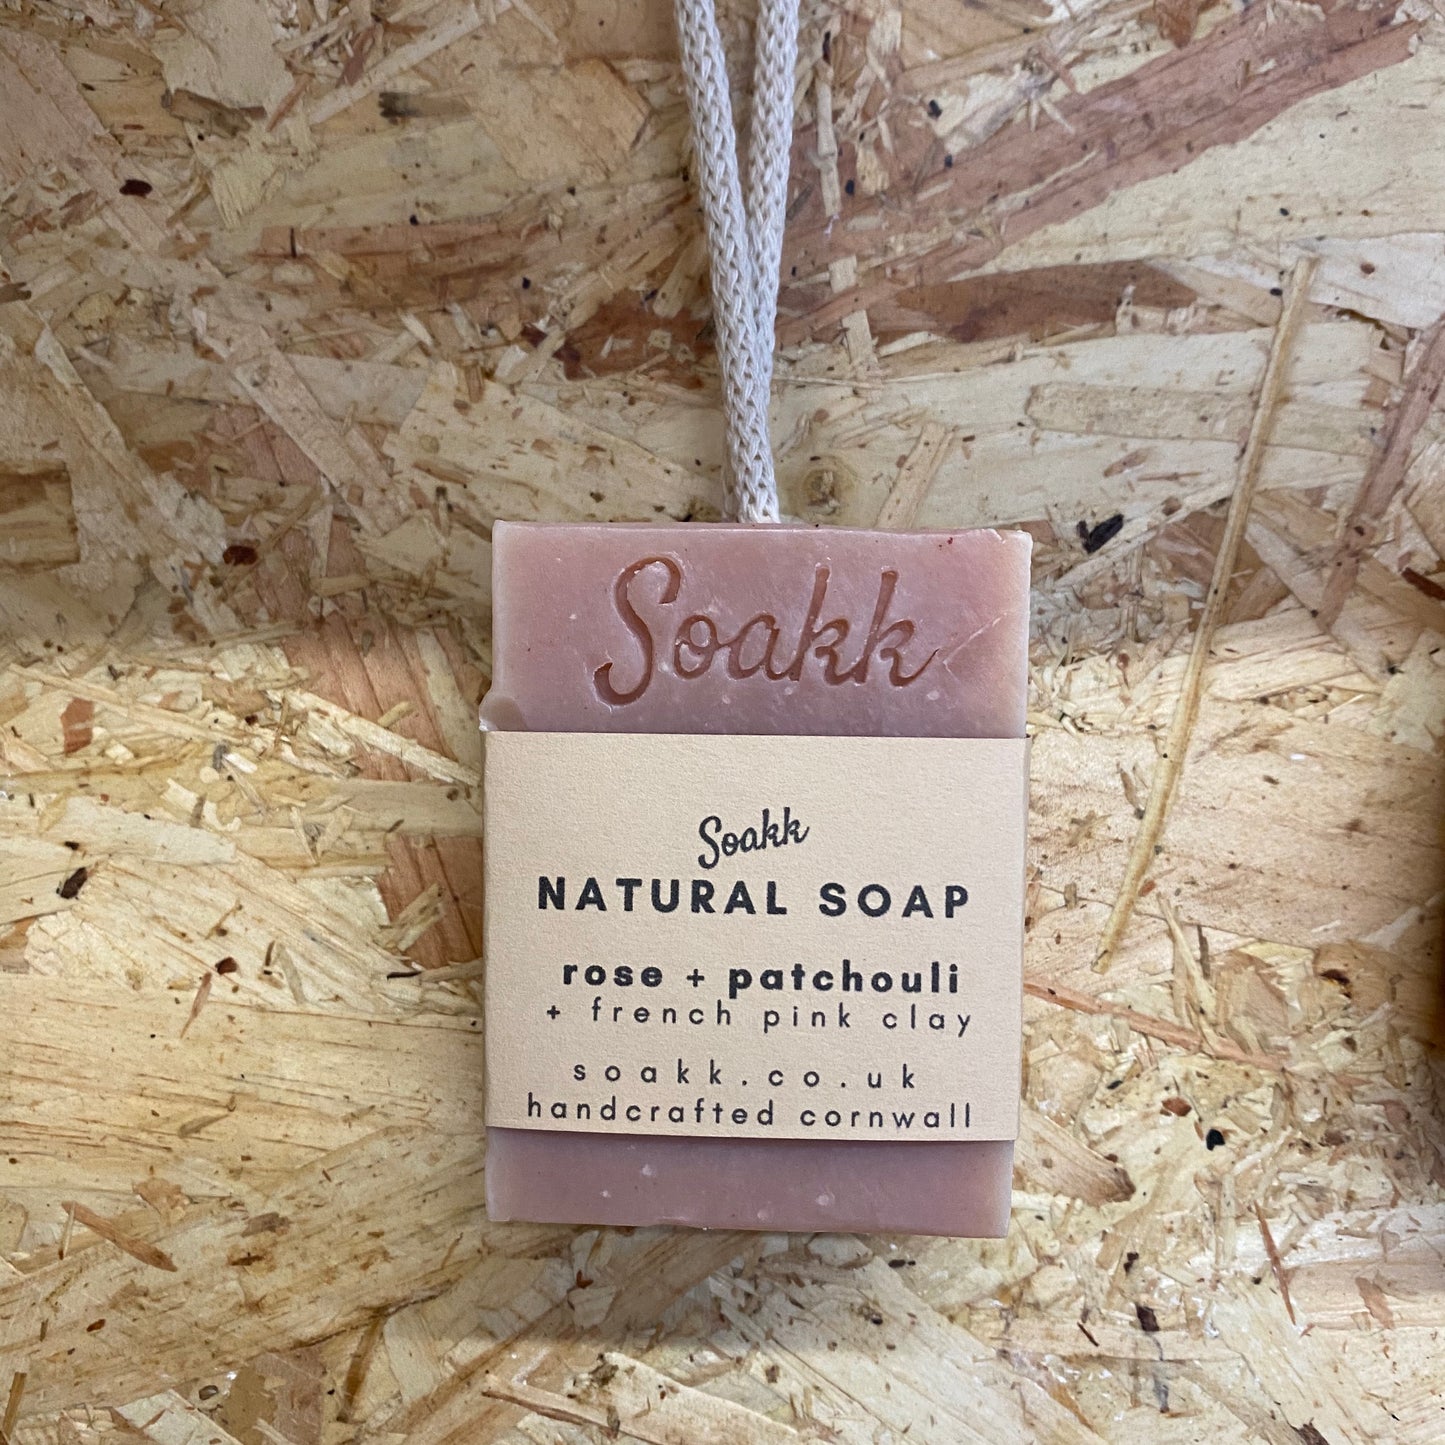 Rose + Patchouli + French Pink Clay Natural soap on a rope